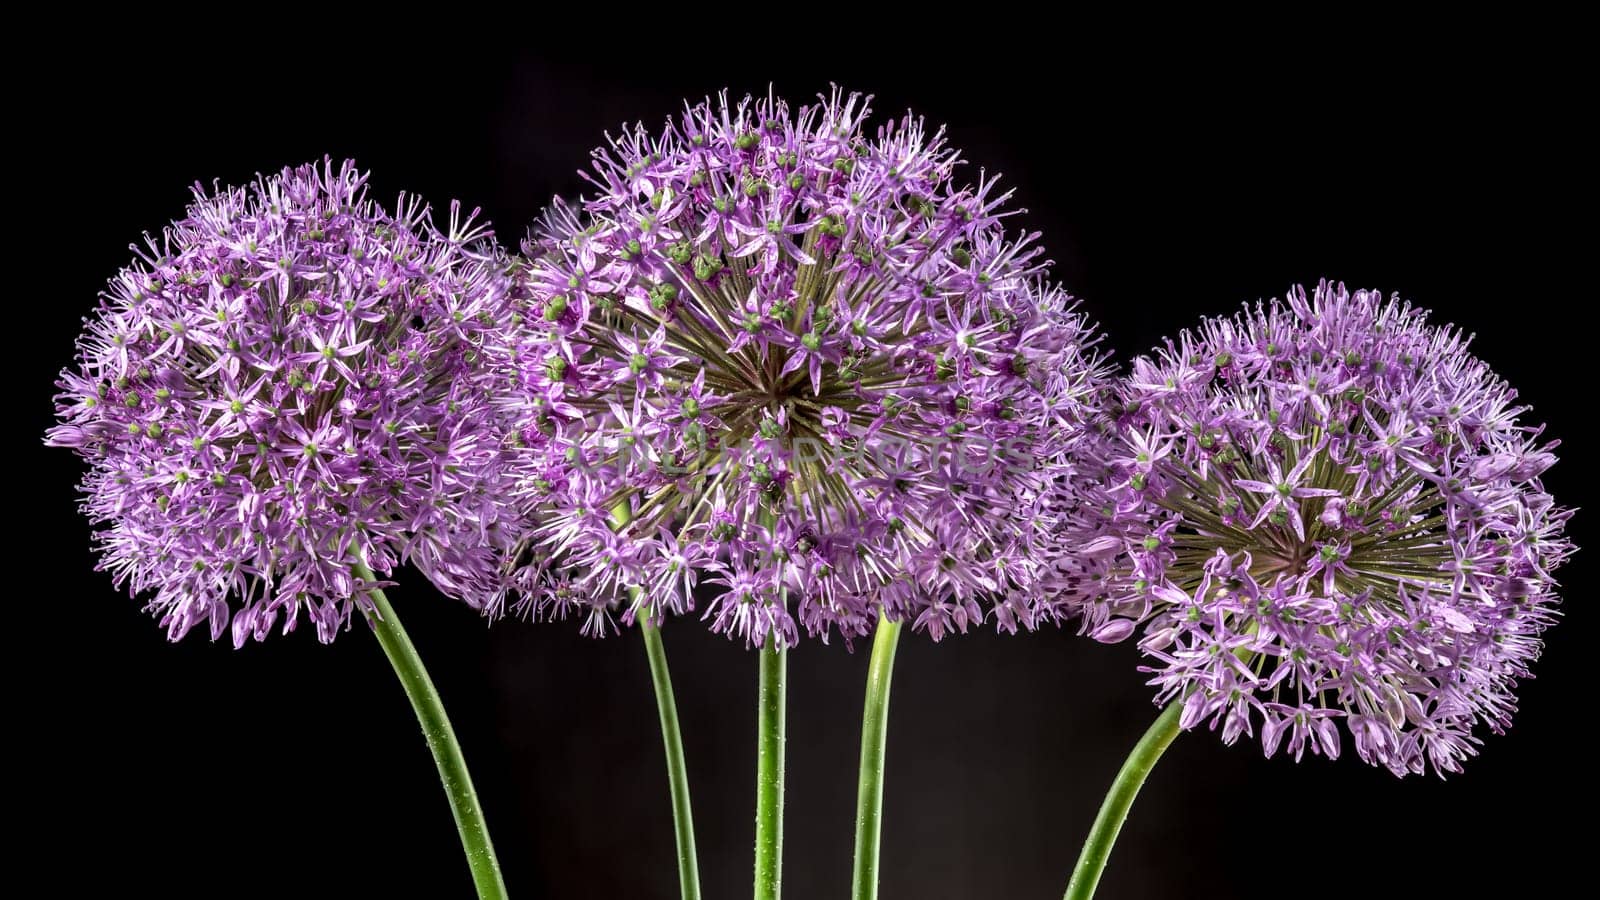 Beautiful Blooming pink flowers of allium aflatunense or ornamental onion on a black background. Flower head close-up.